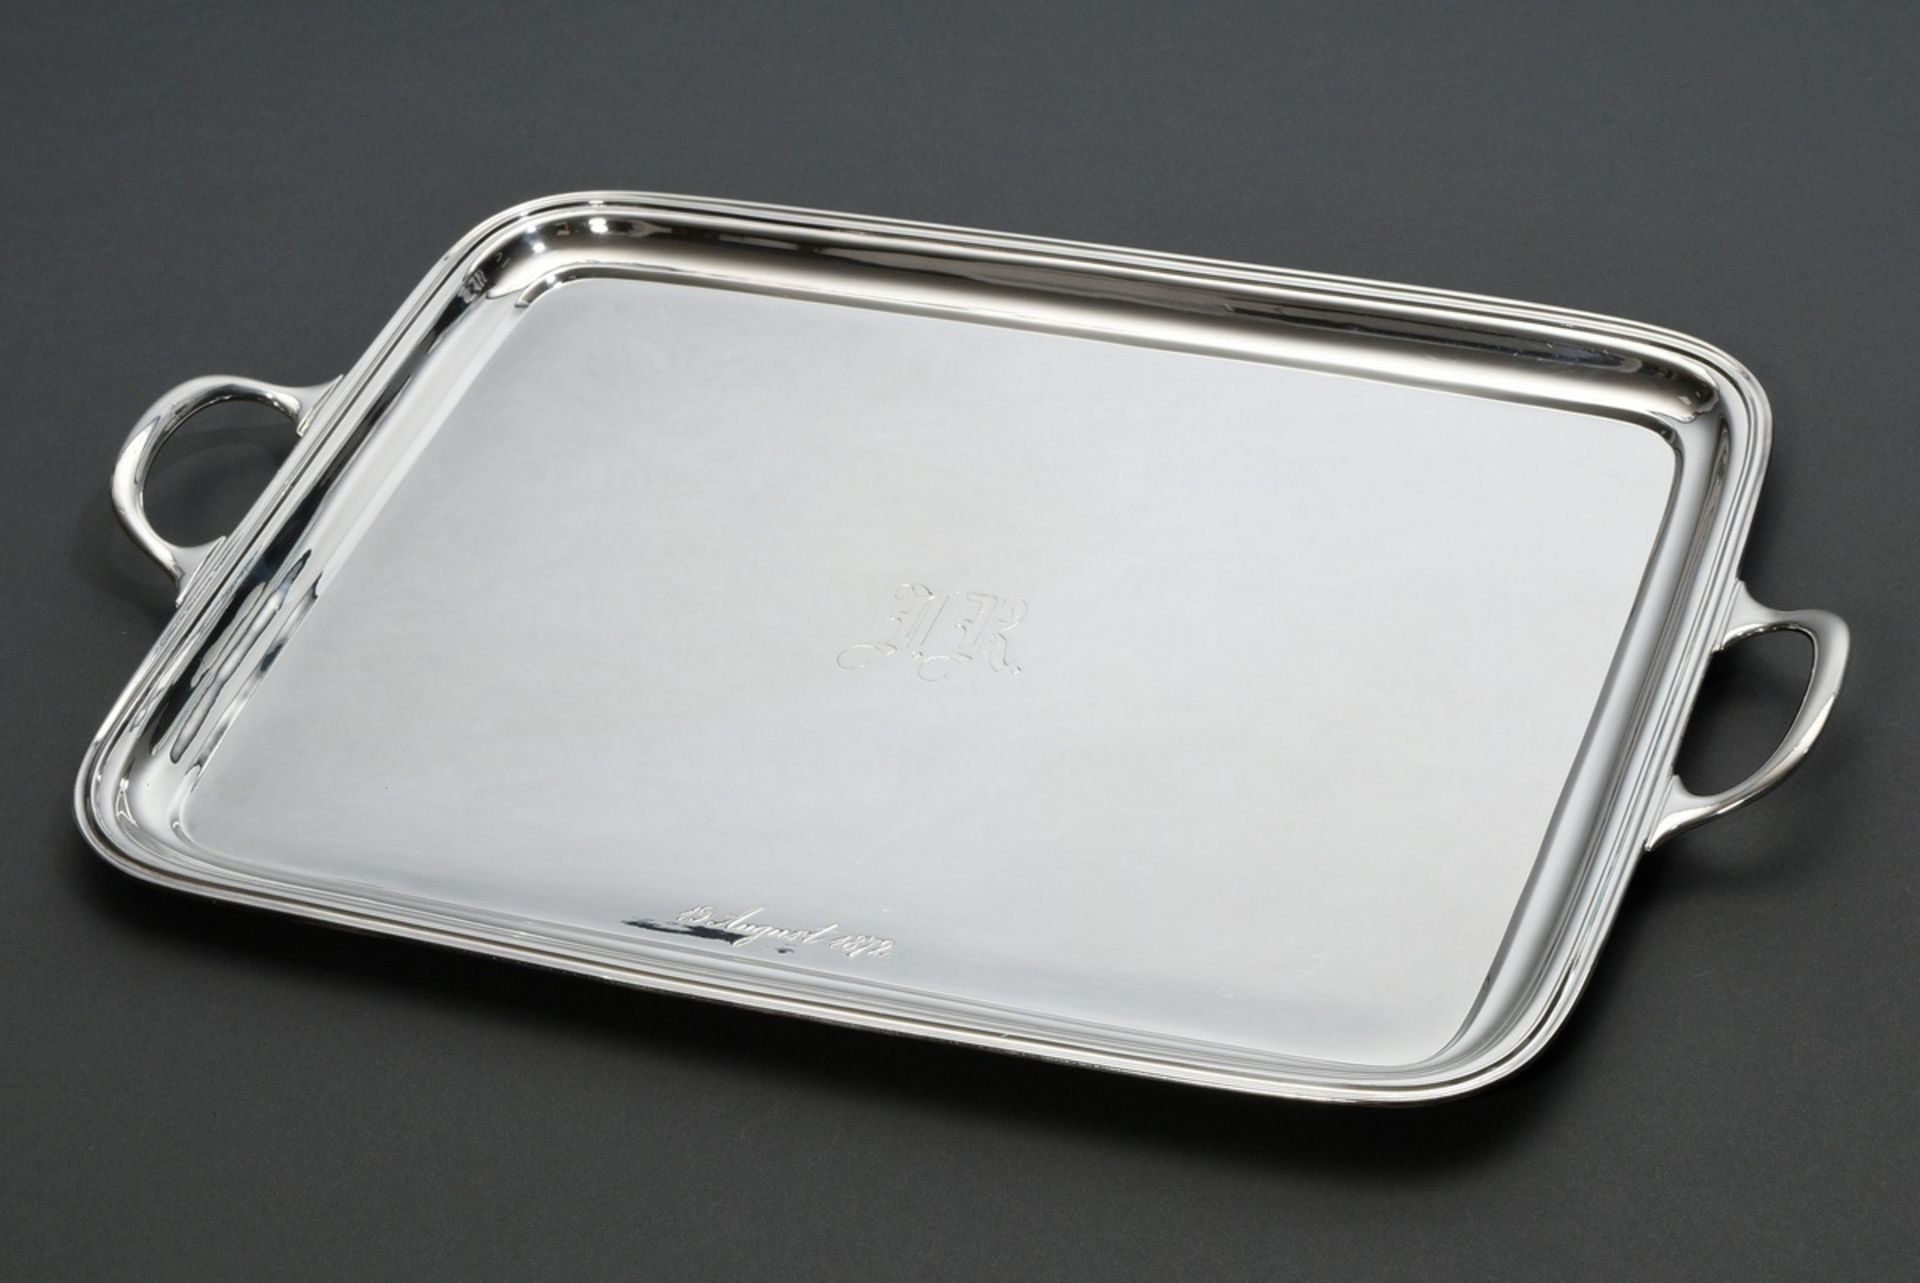 Rectangular tray in a simple design with side handles and monogram in Fraktur script ‘JR’ and date 